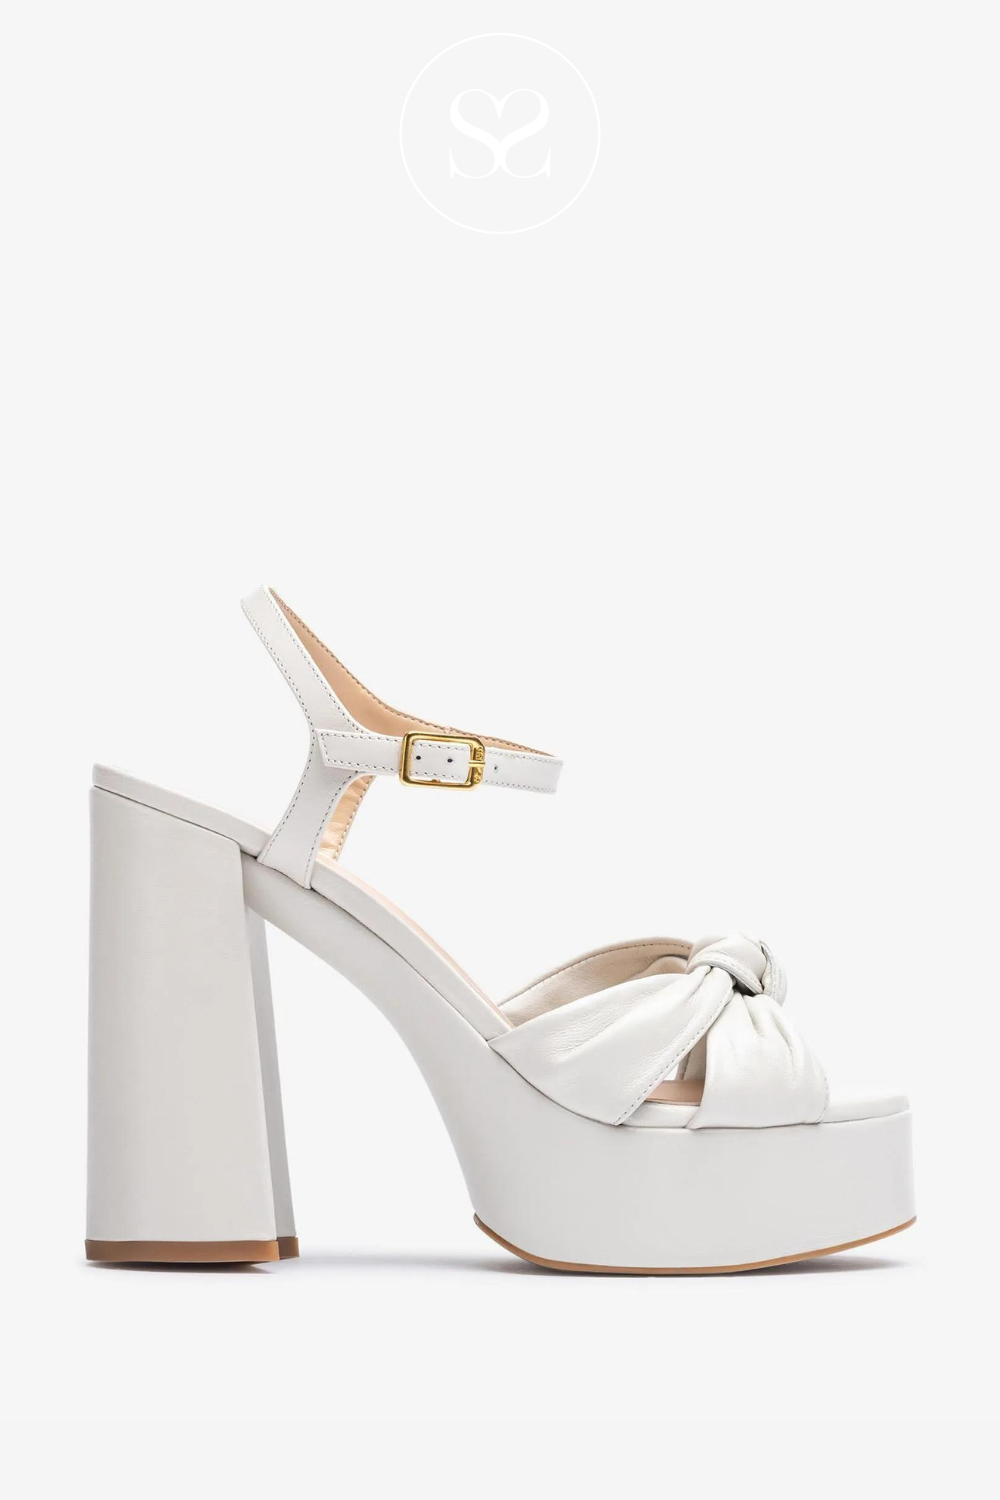 Prove Your Point Strappy Block Heels